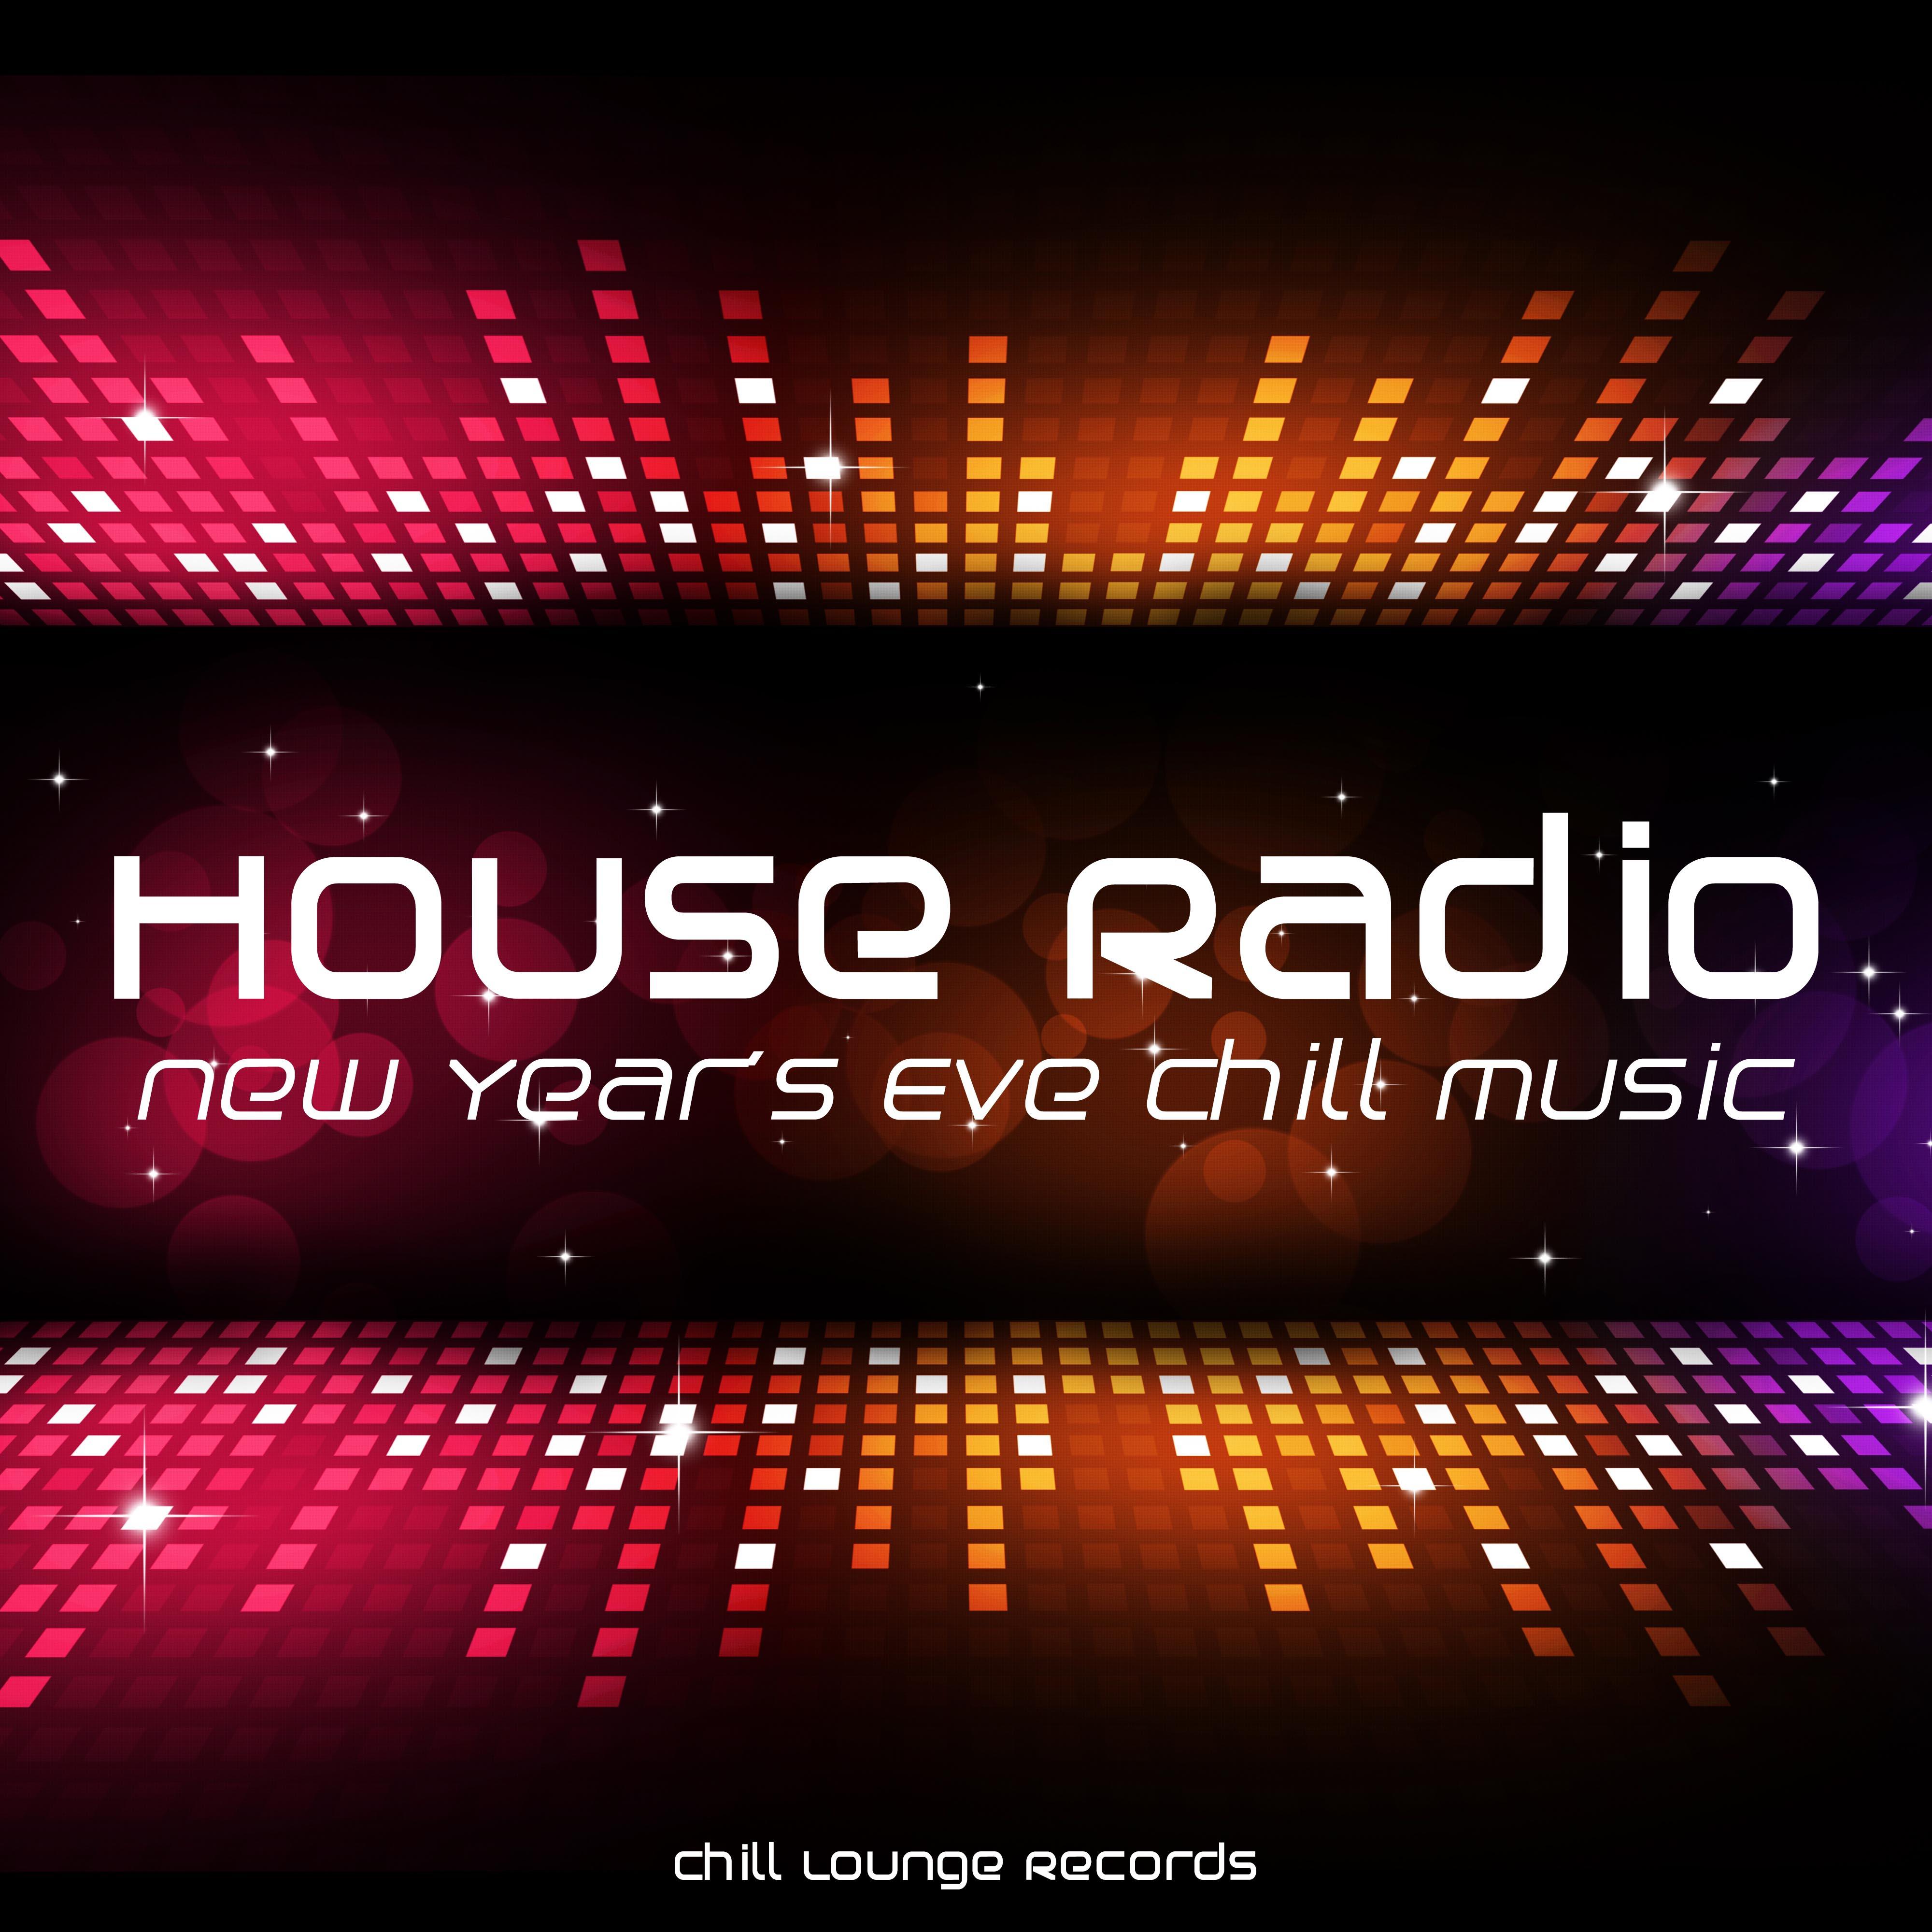 House Radio: New Year's Eve Chill Music, Tropical and Soulful House Music with Relaxing and Uplifting Chillout Songs